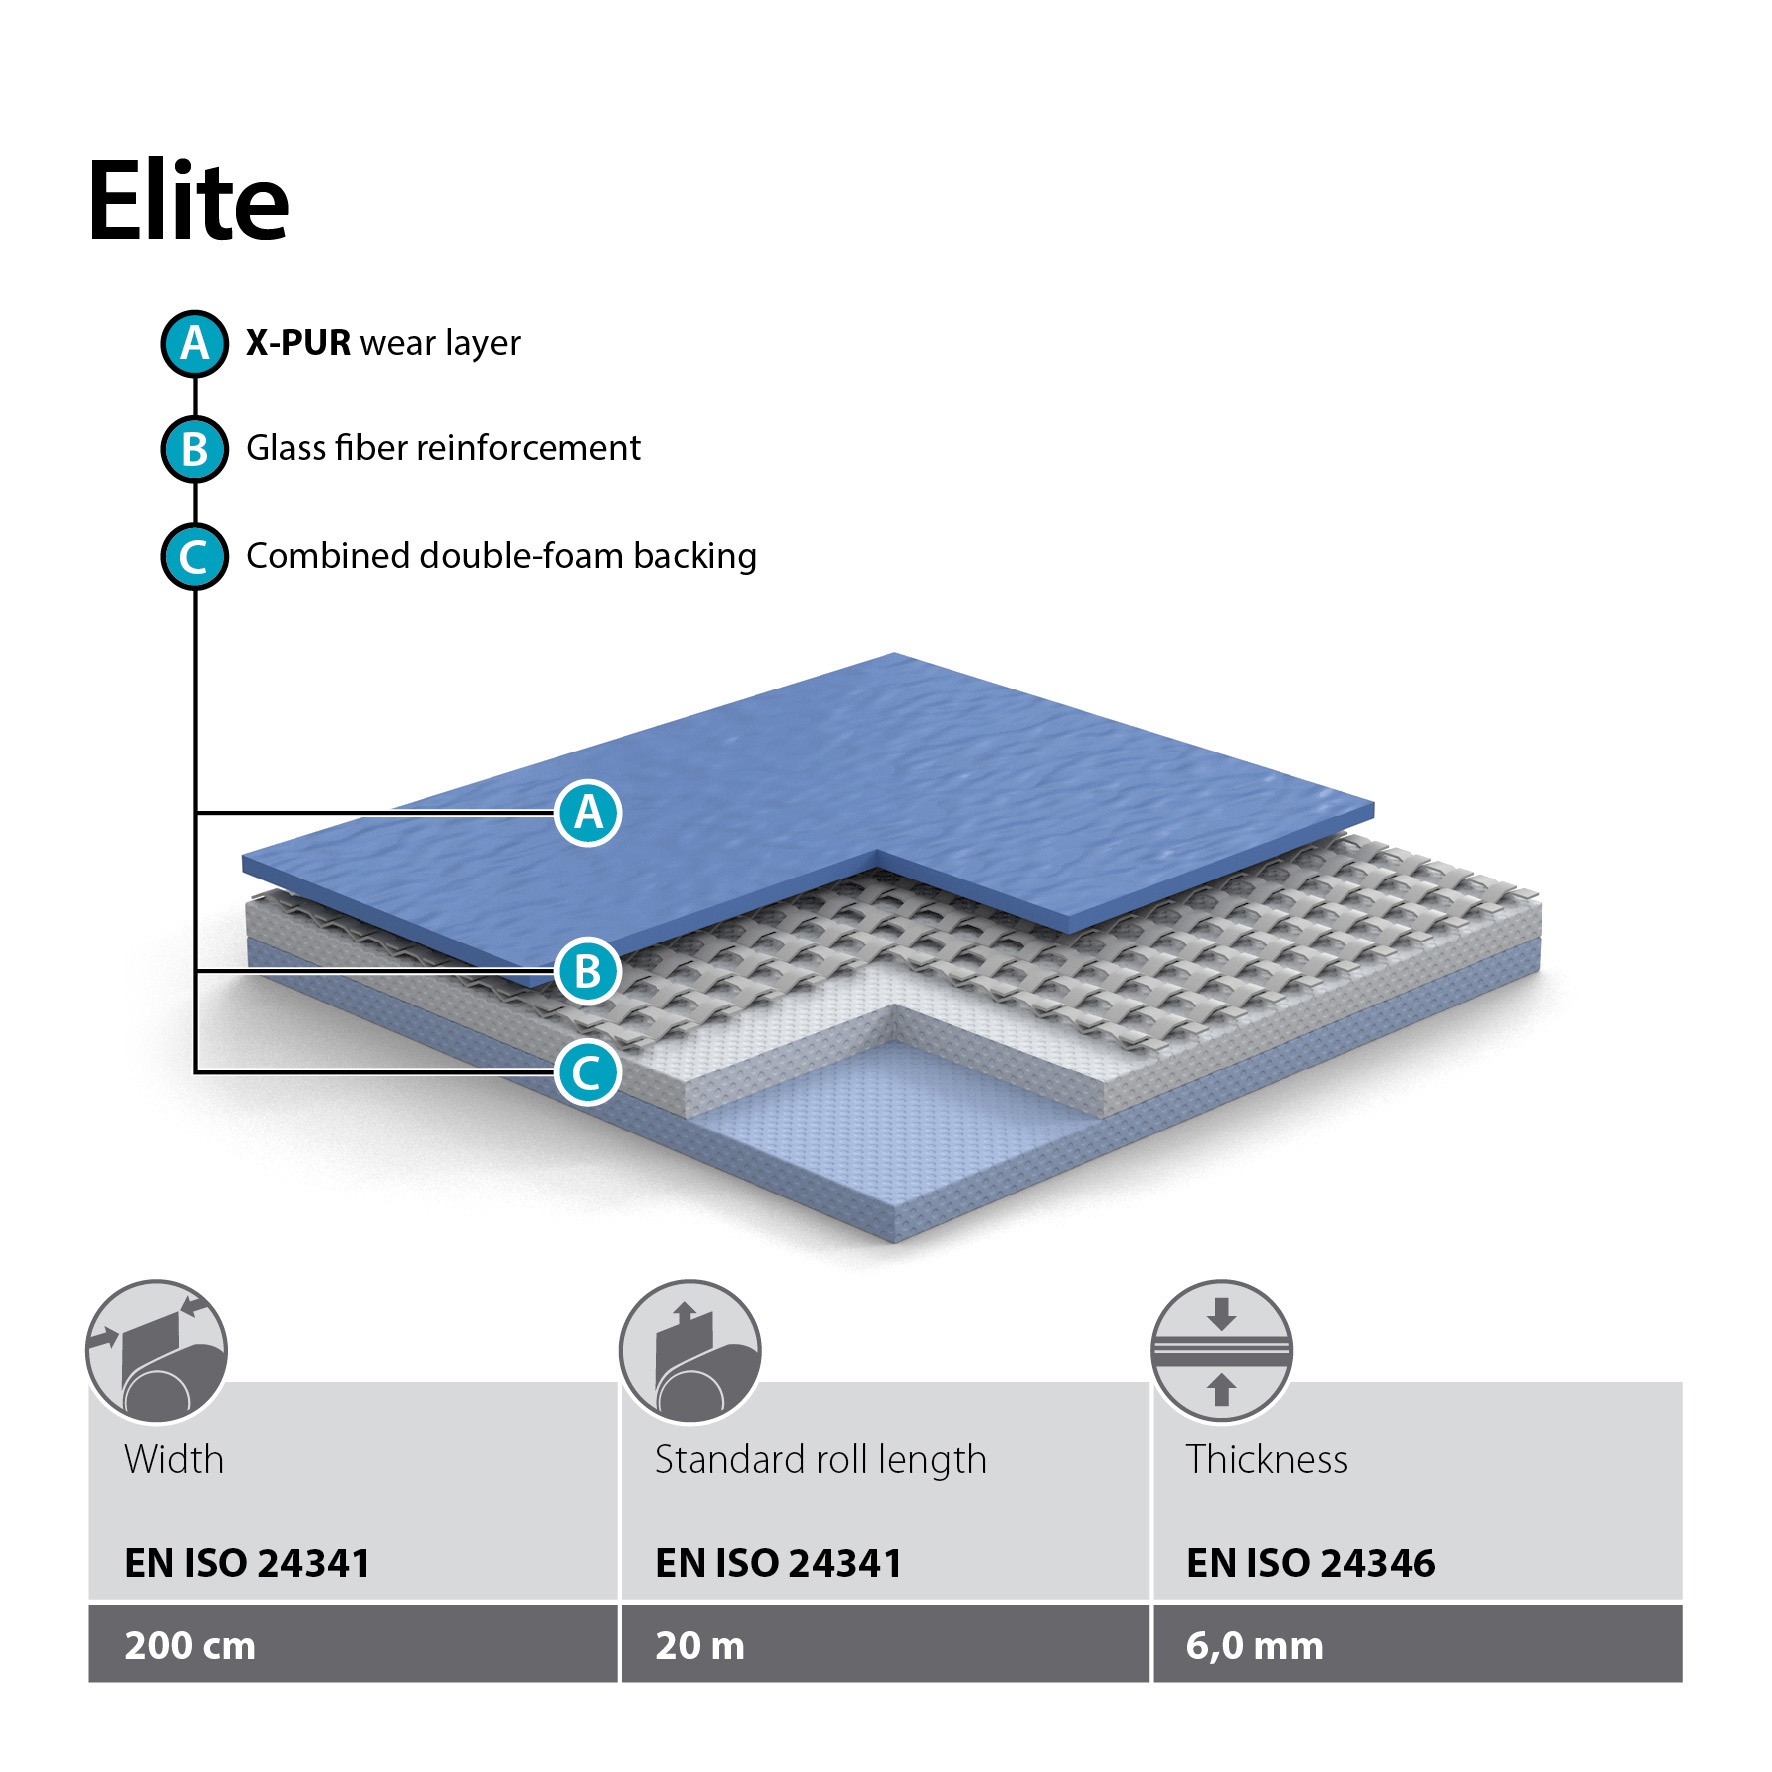 Graboplast's new sports floorings with X-PUR surface - GraboSport Elite